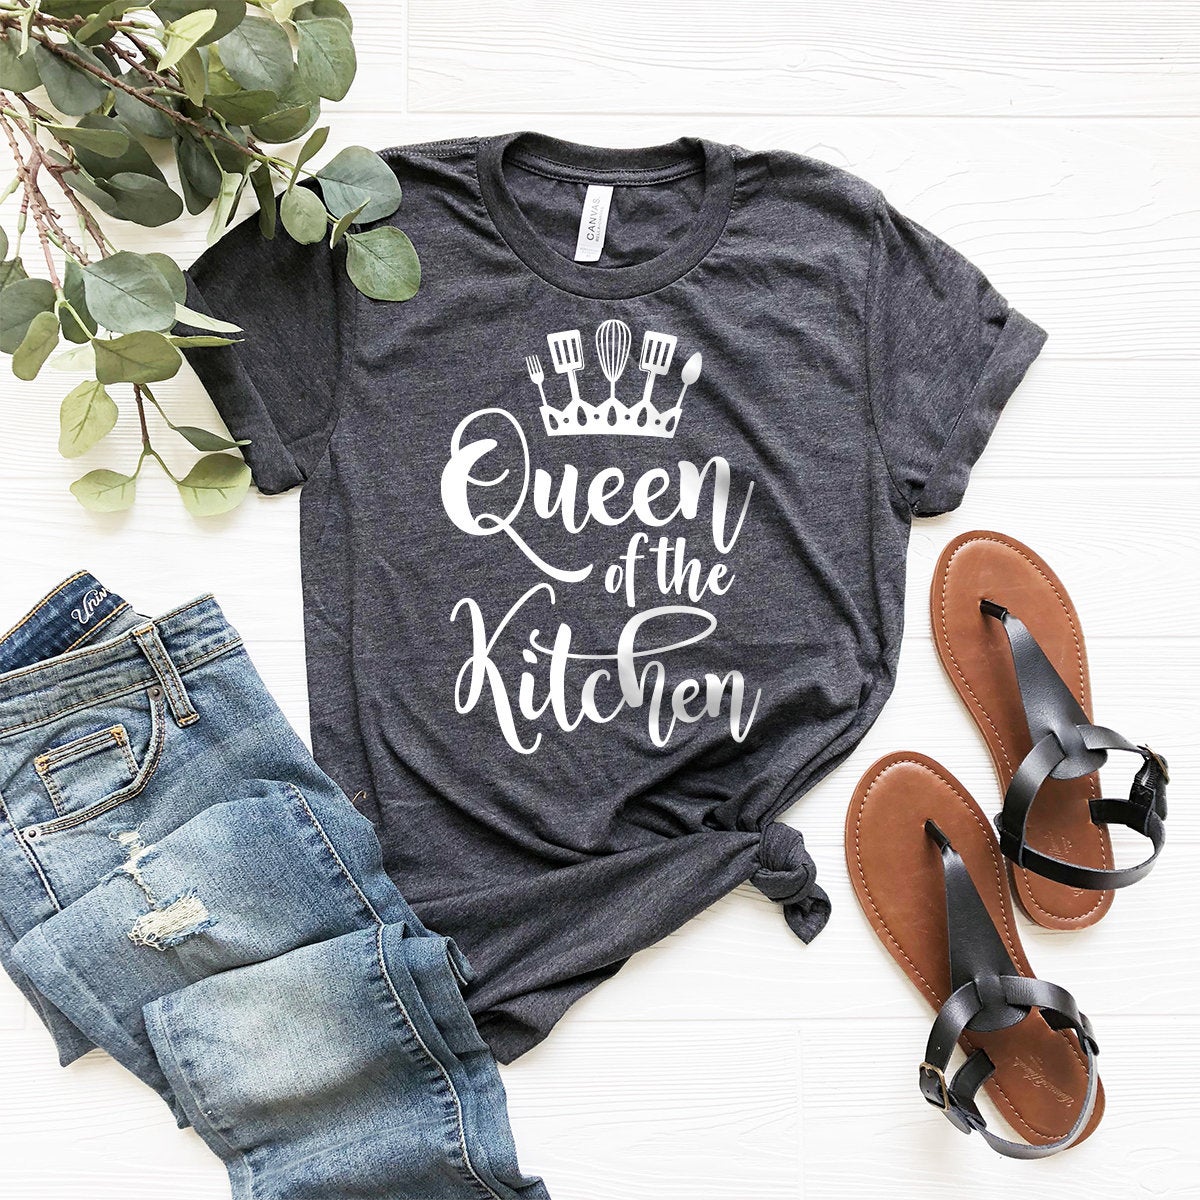 Mom Cooking Shirt, Queen Of The Kitchen Shirt, Baking Queen Shirt, Mom Life Shirt, Mom T Shirt, Kitchen Mom Shirt, Gift For Mom, Mom Tee - Fastdeliverytees.com